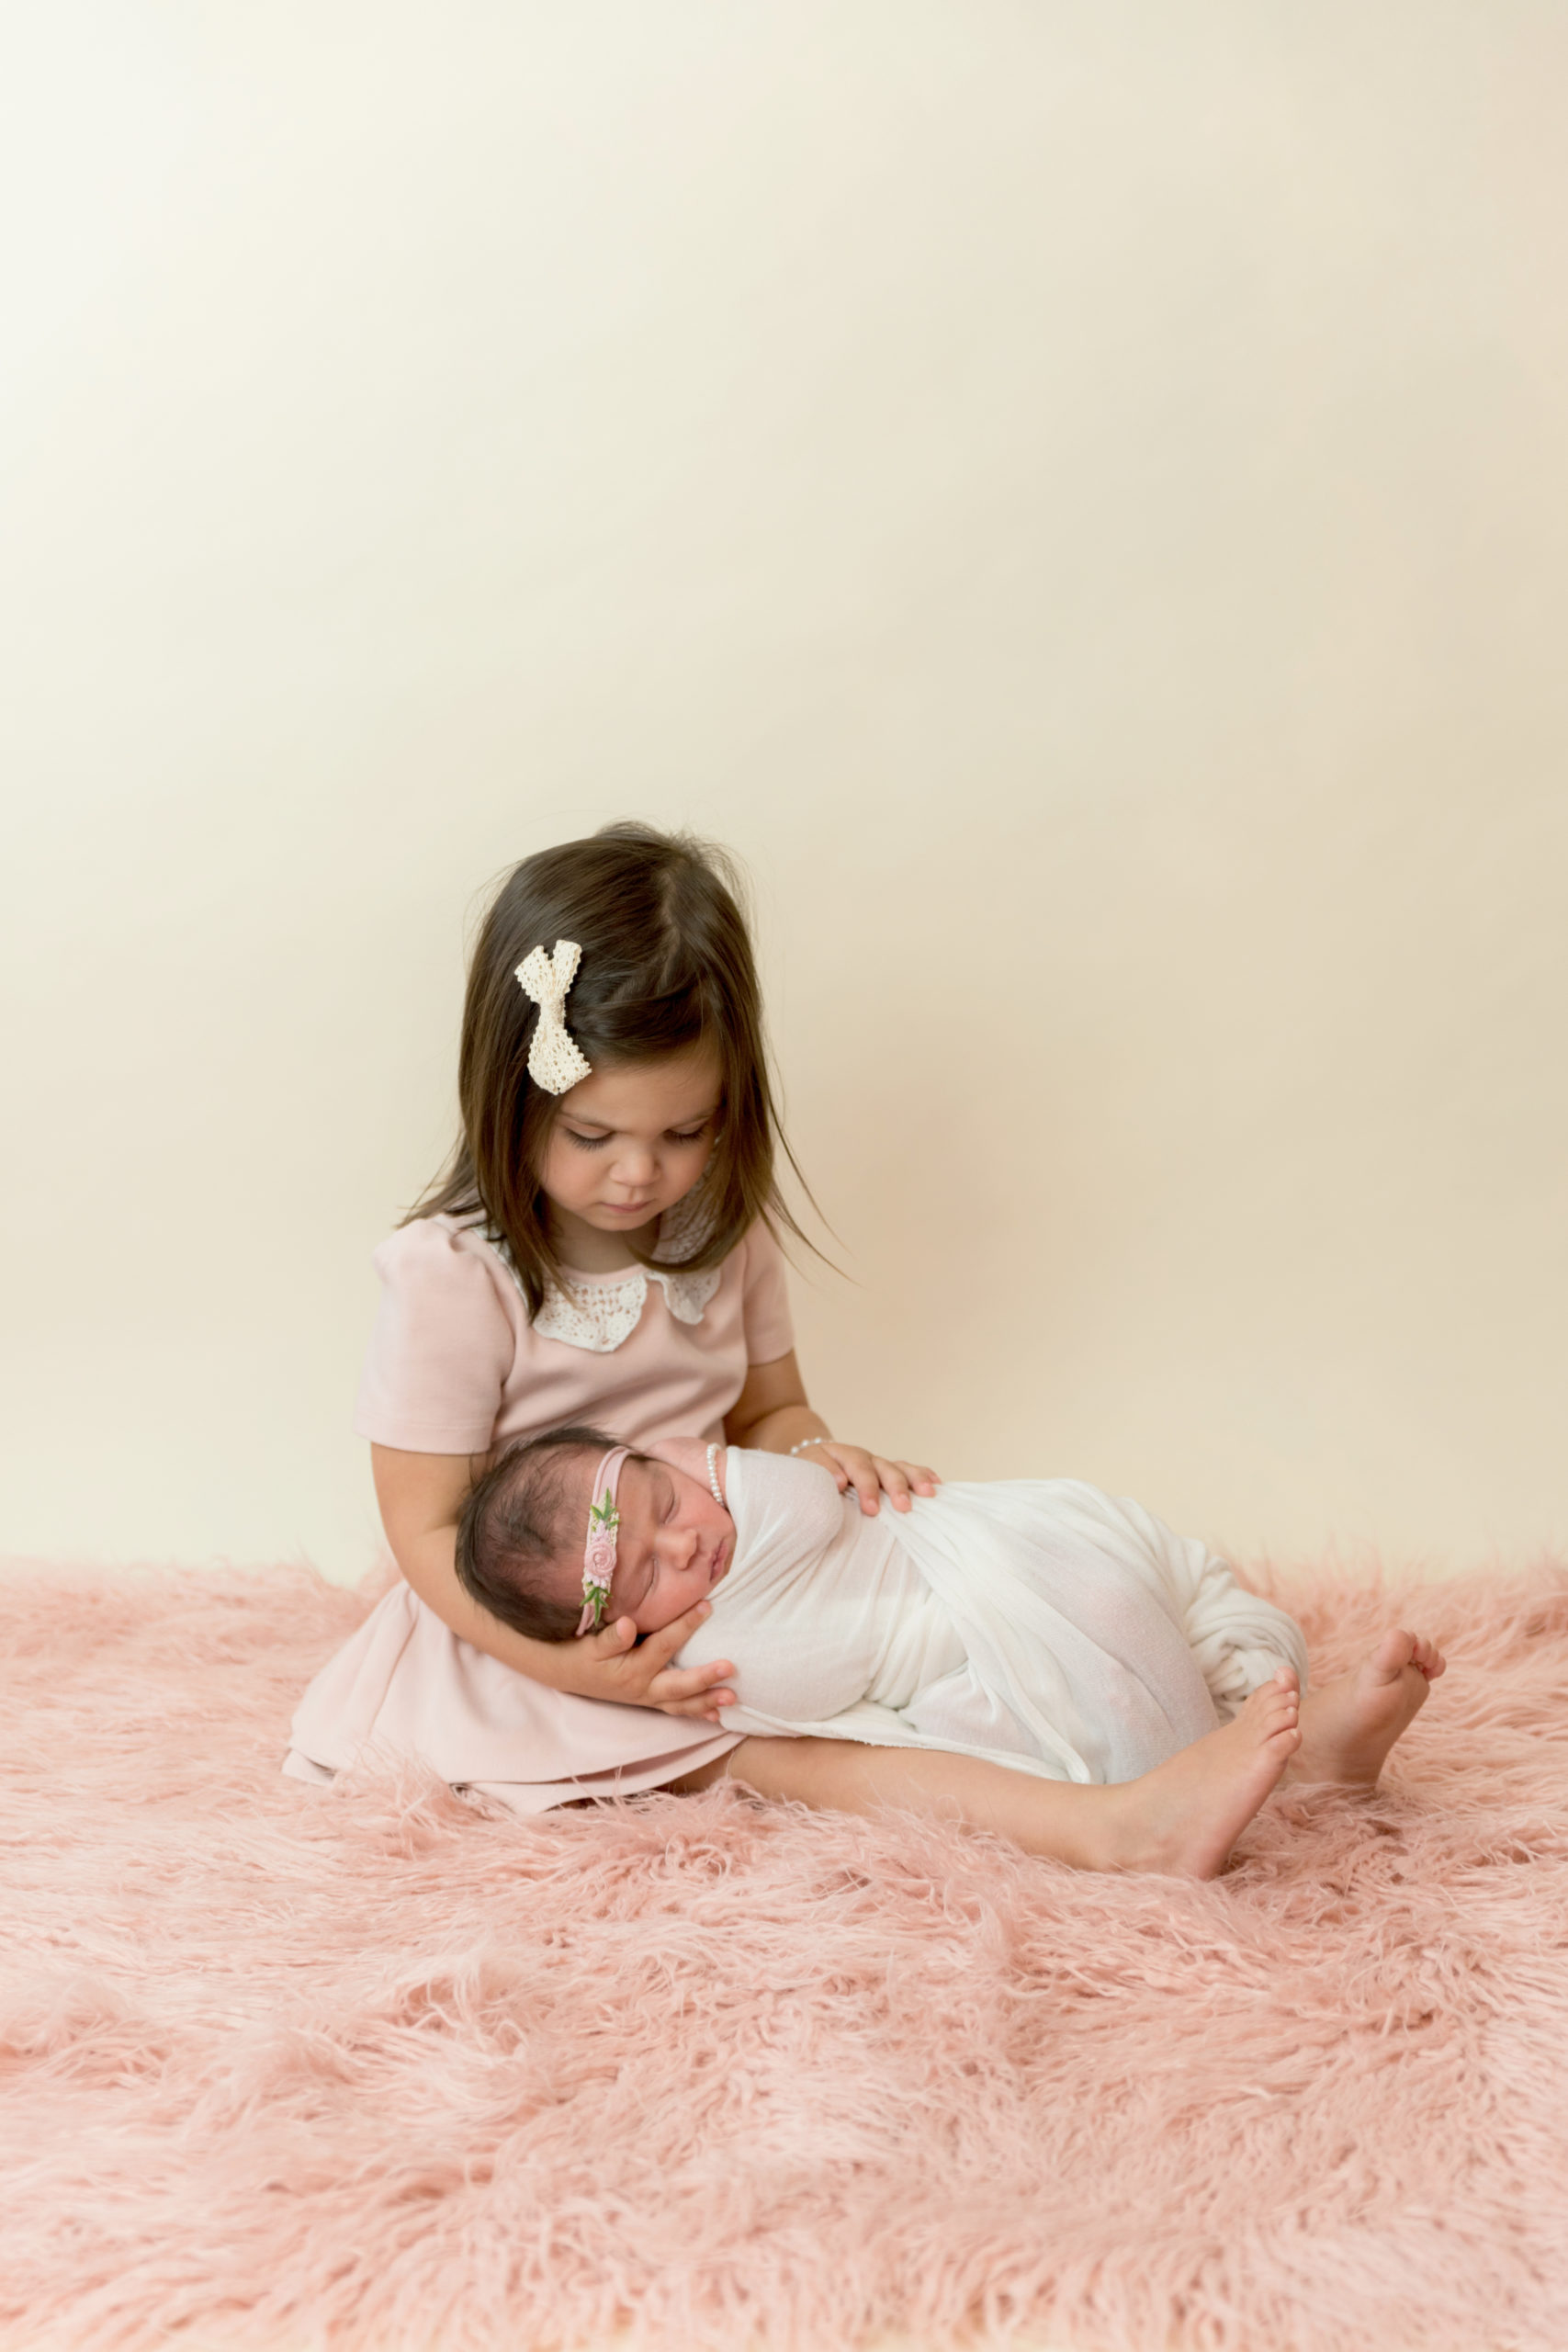 Lancaster Newborn Photography Session-Posed Photography Older Sister holding baby sister